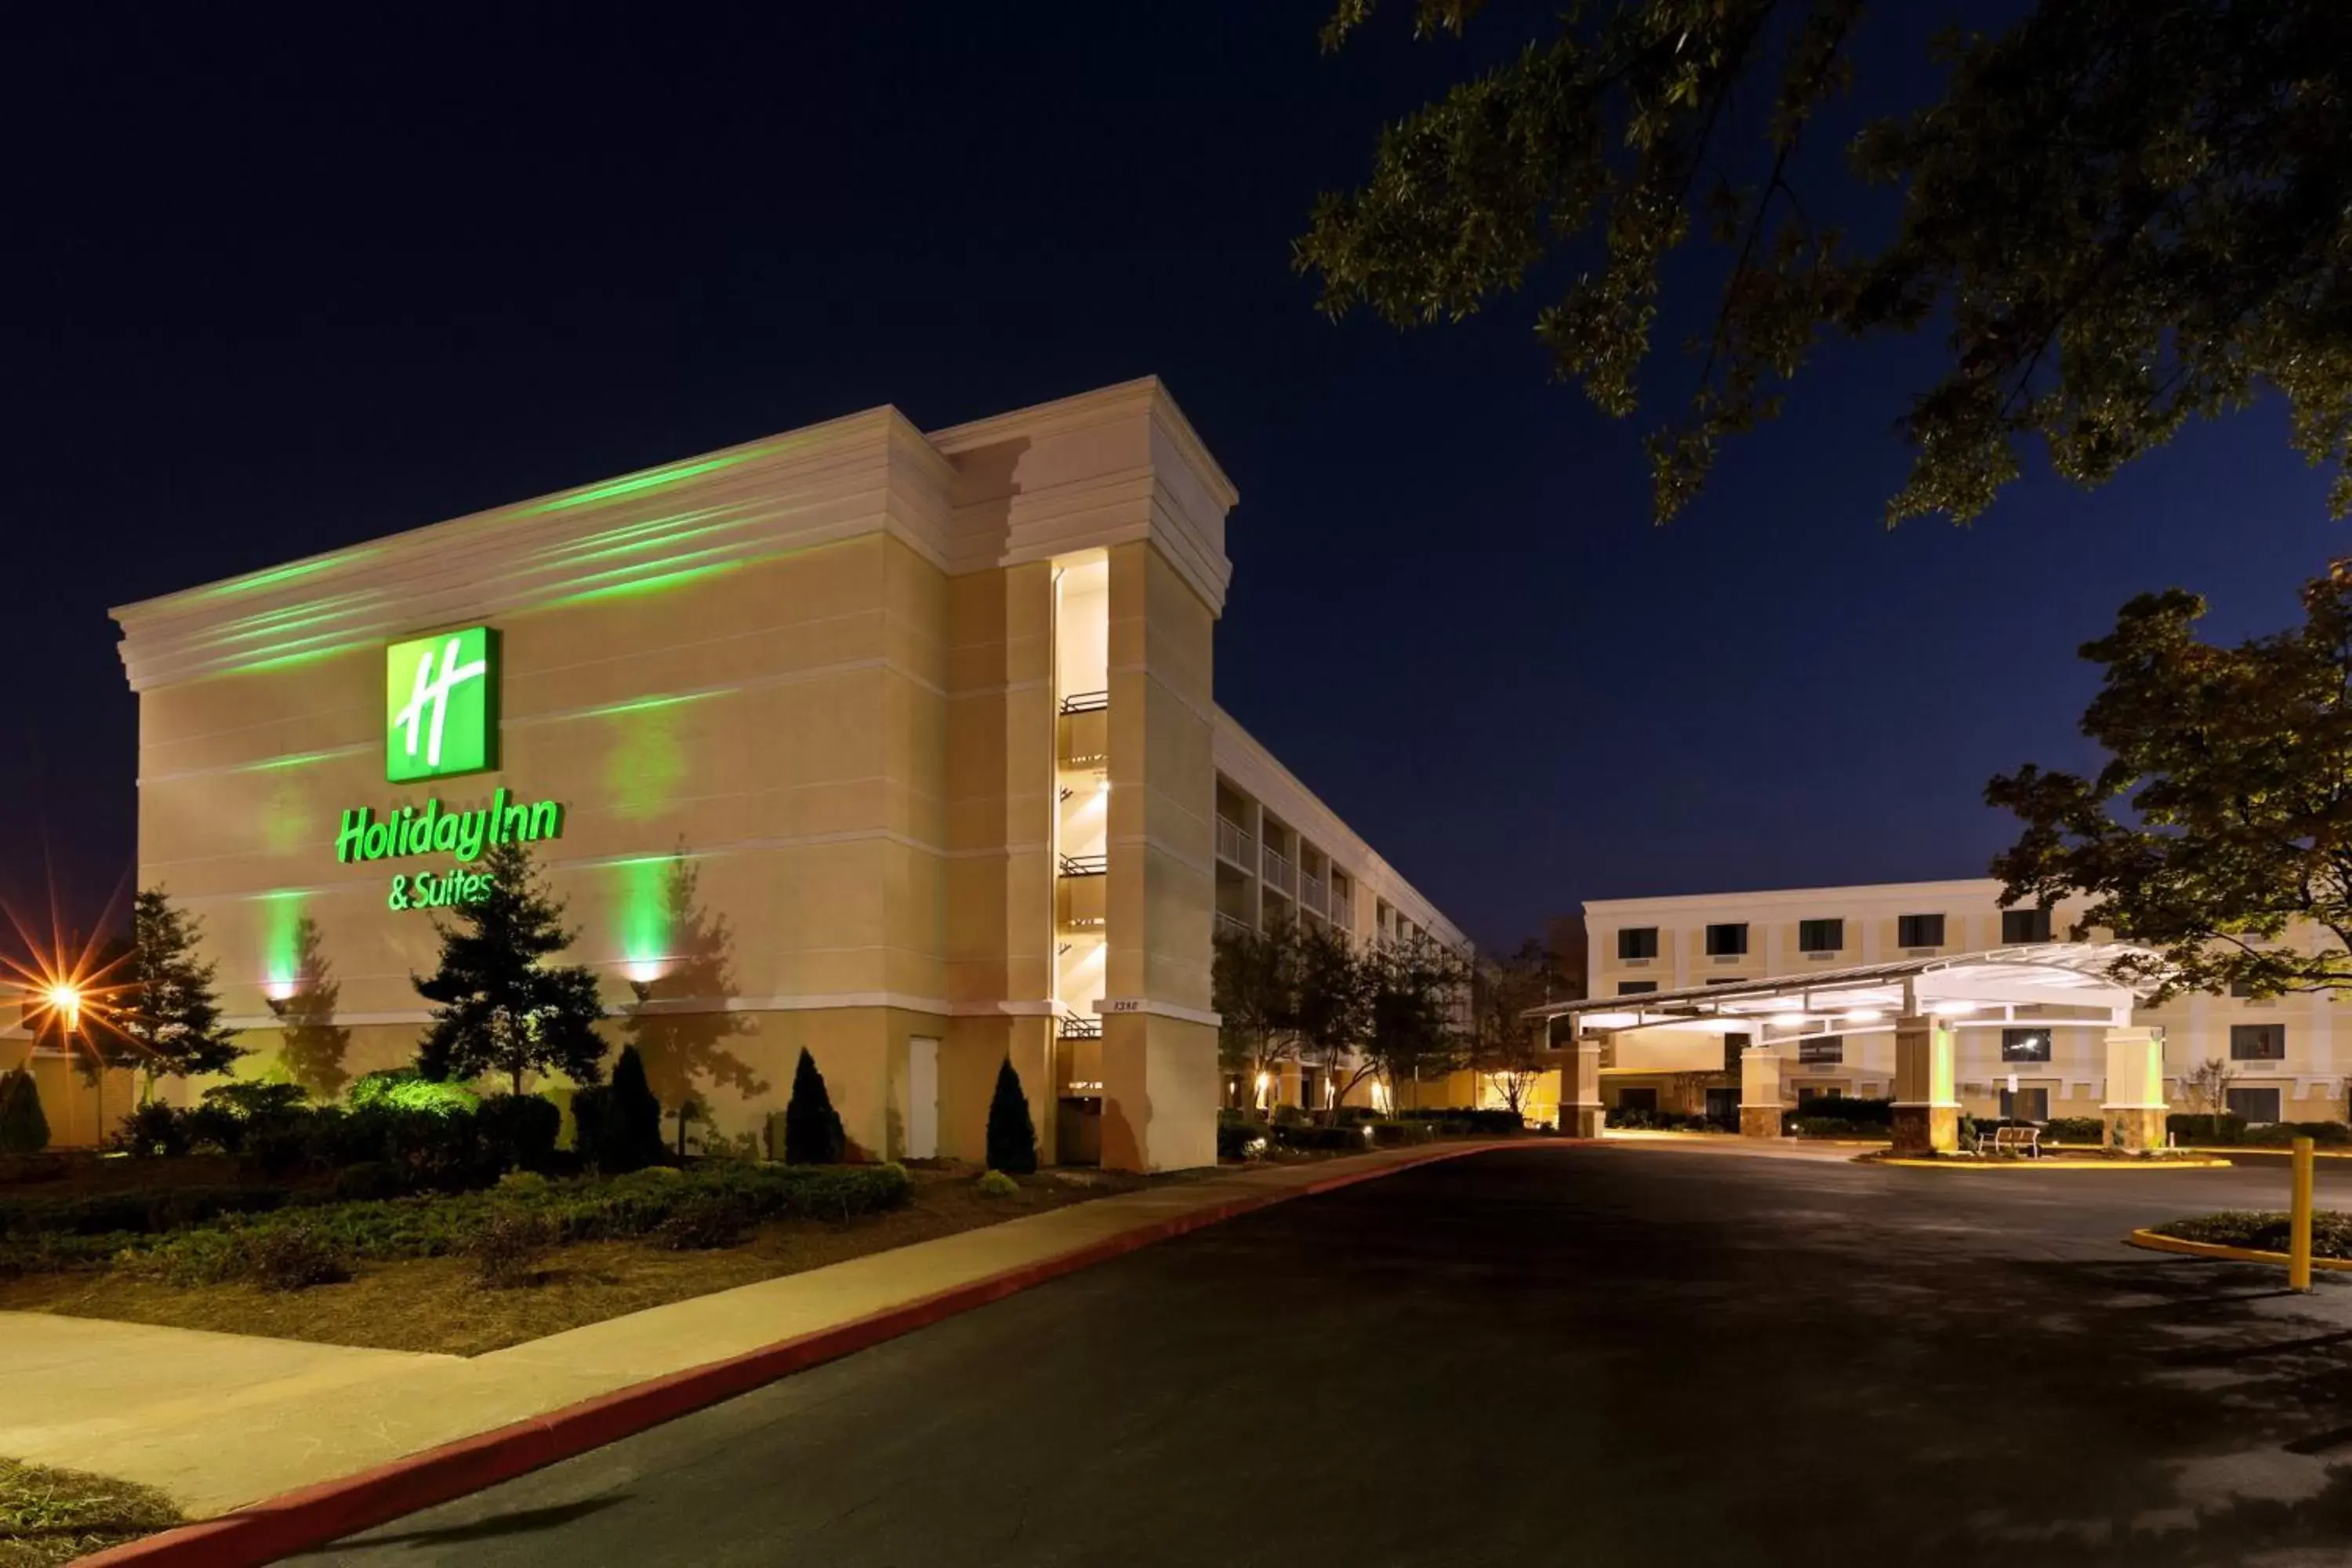 Property Building in Holiday Inn & Suites Atlanta Airport North, an IHG Hotel